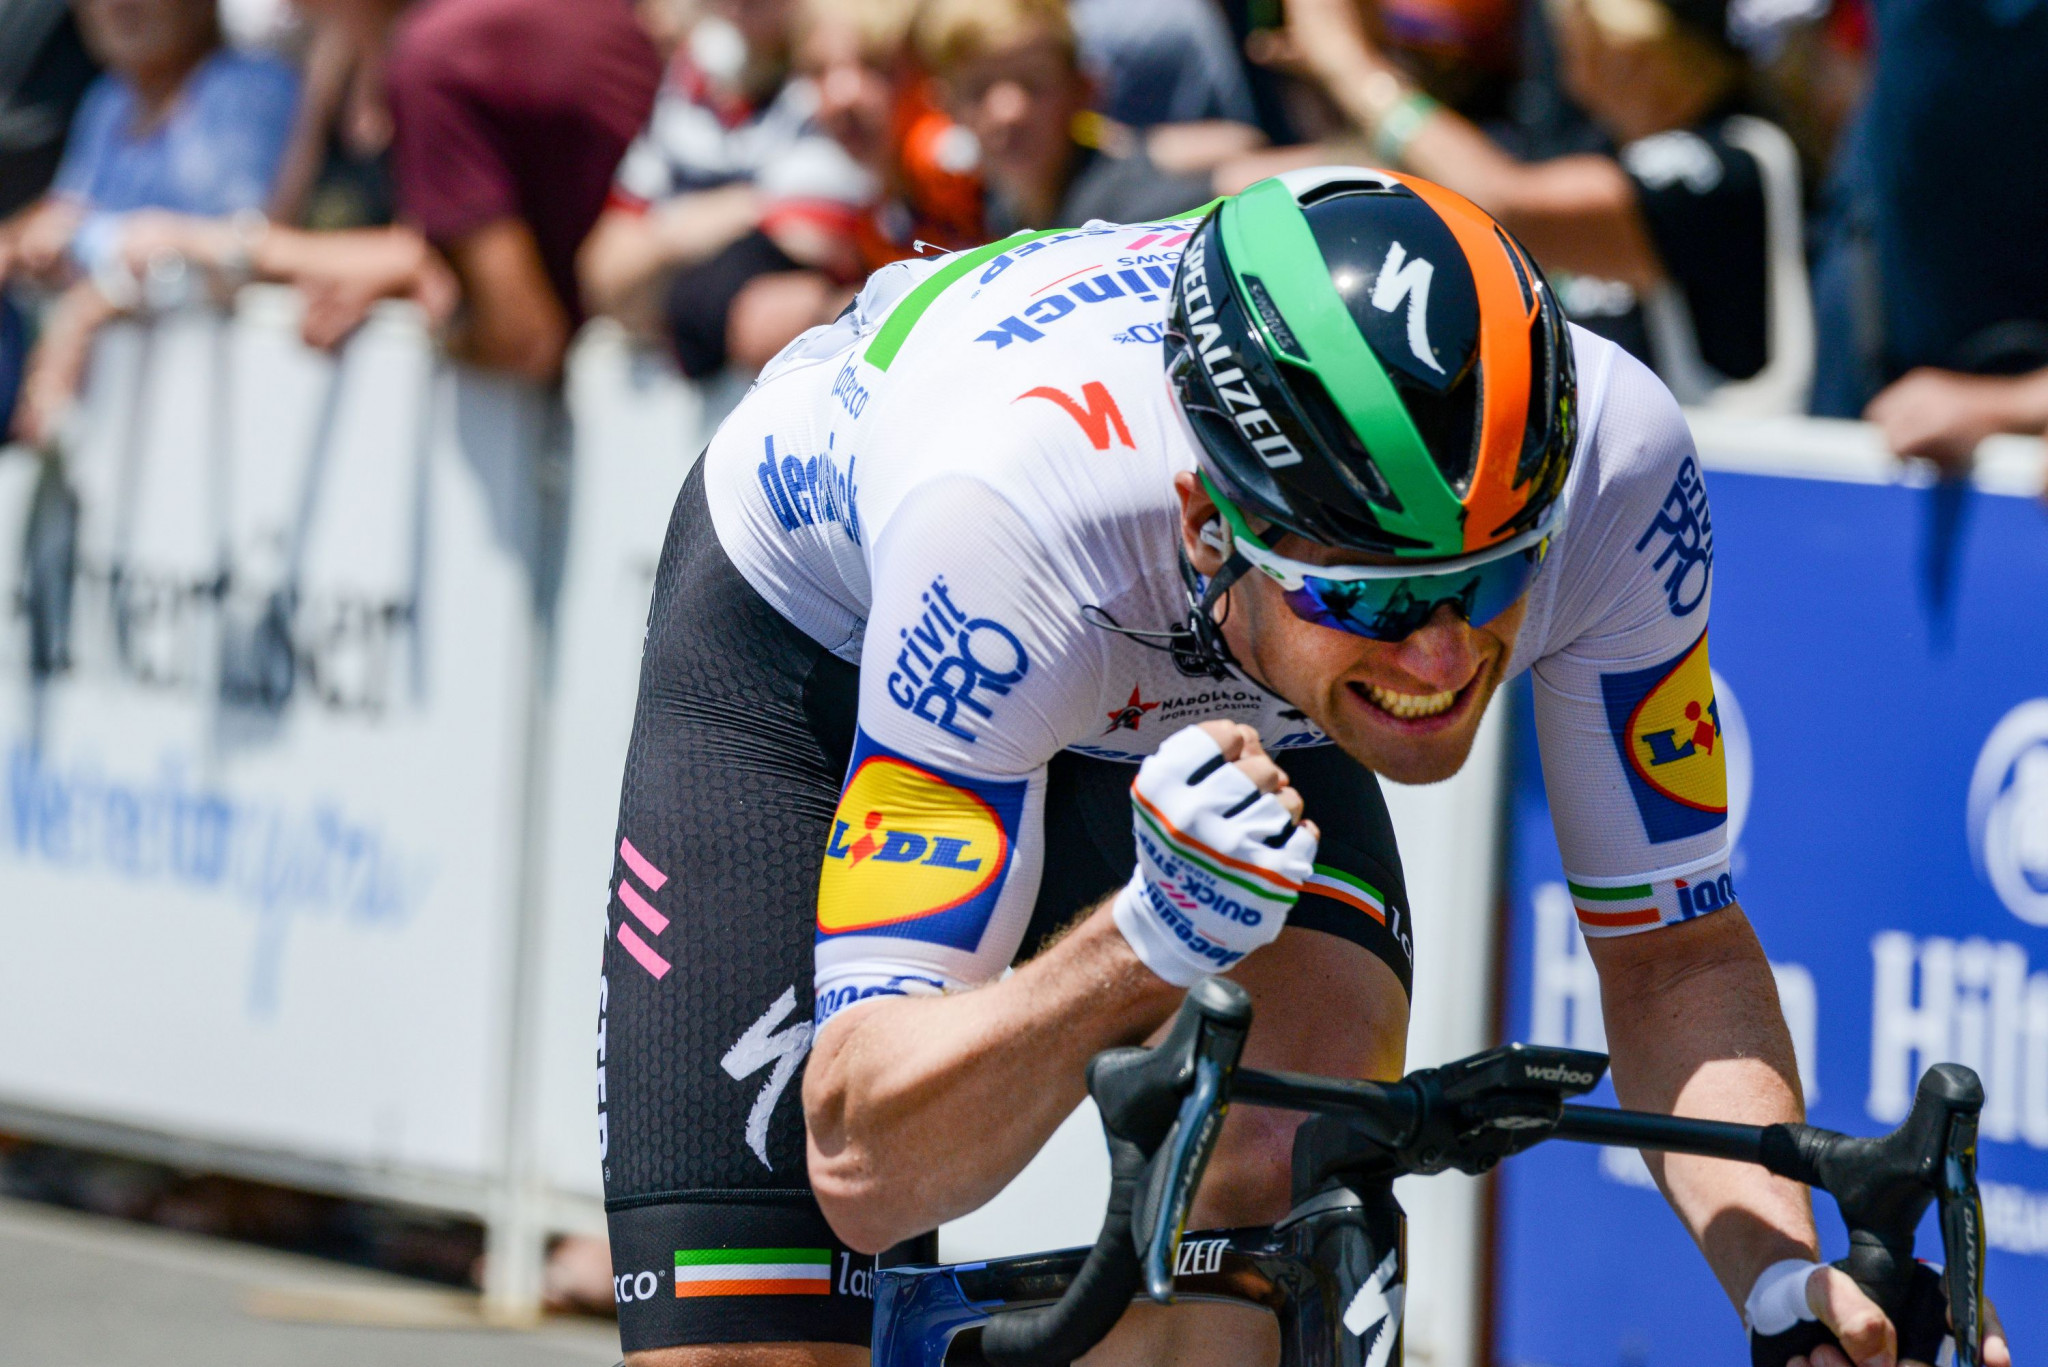 Ireland's Bennett sprints to opening stage win at Tour Down Under